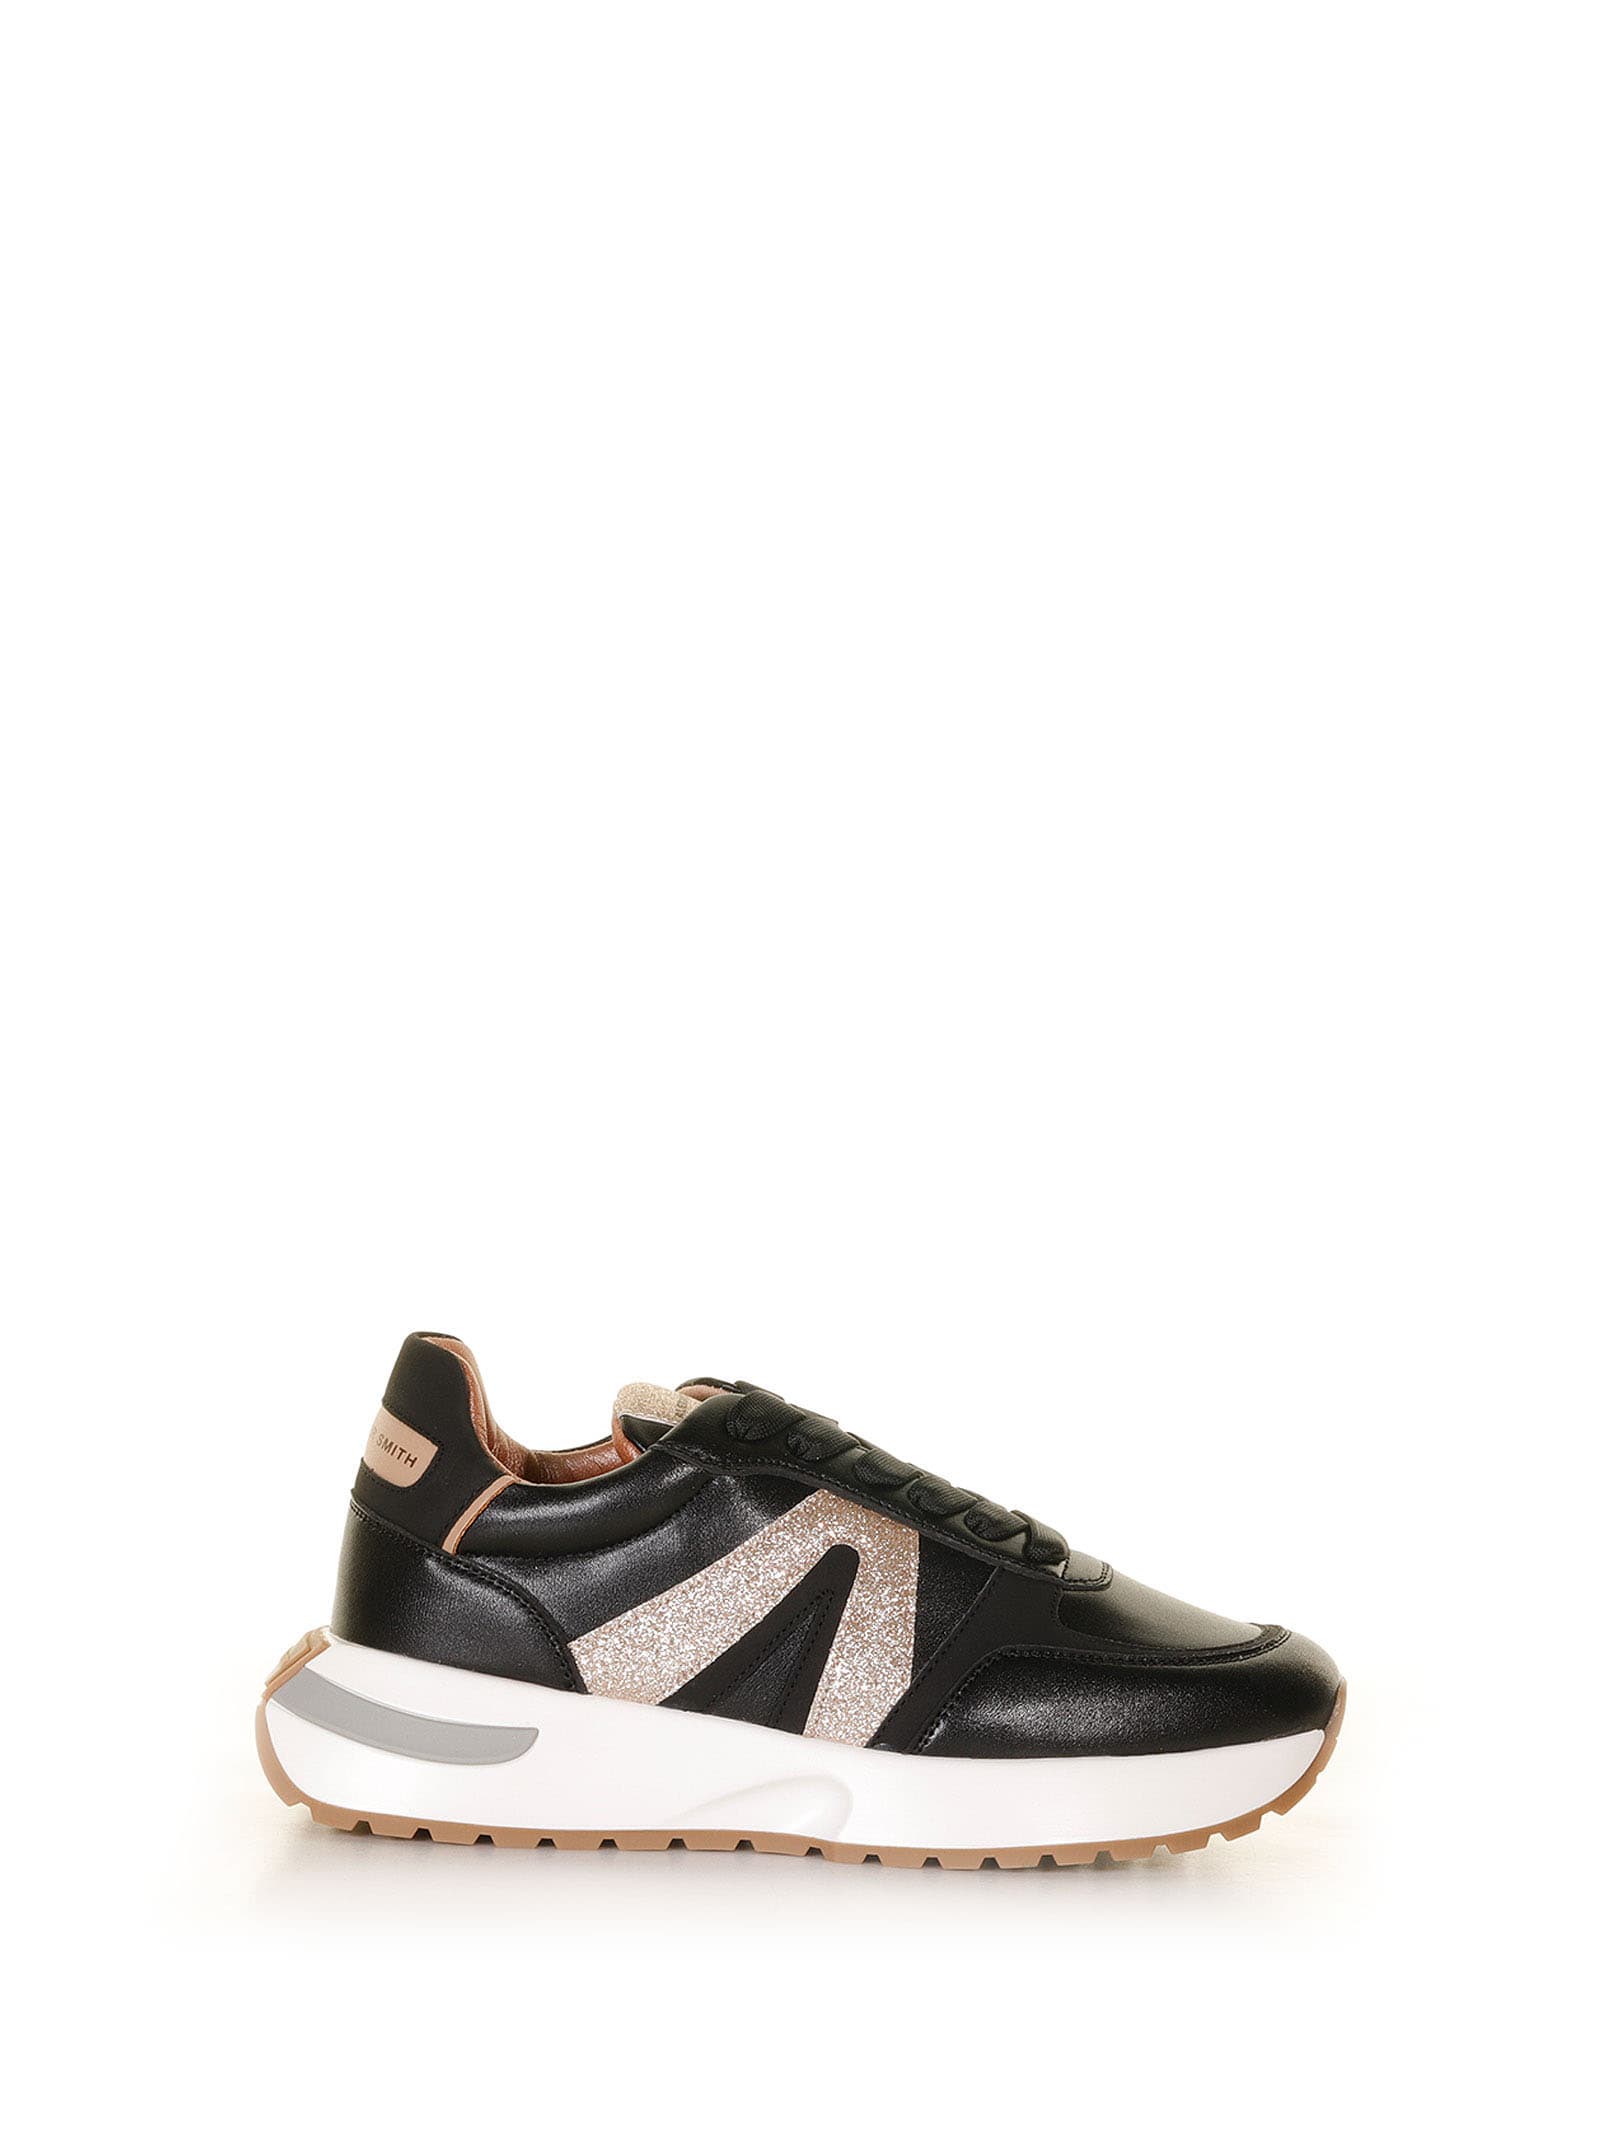 Alexander Smith Hyde Sneaker In Leather In Black Gold